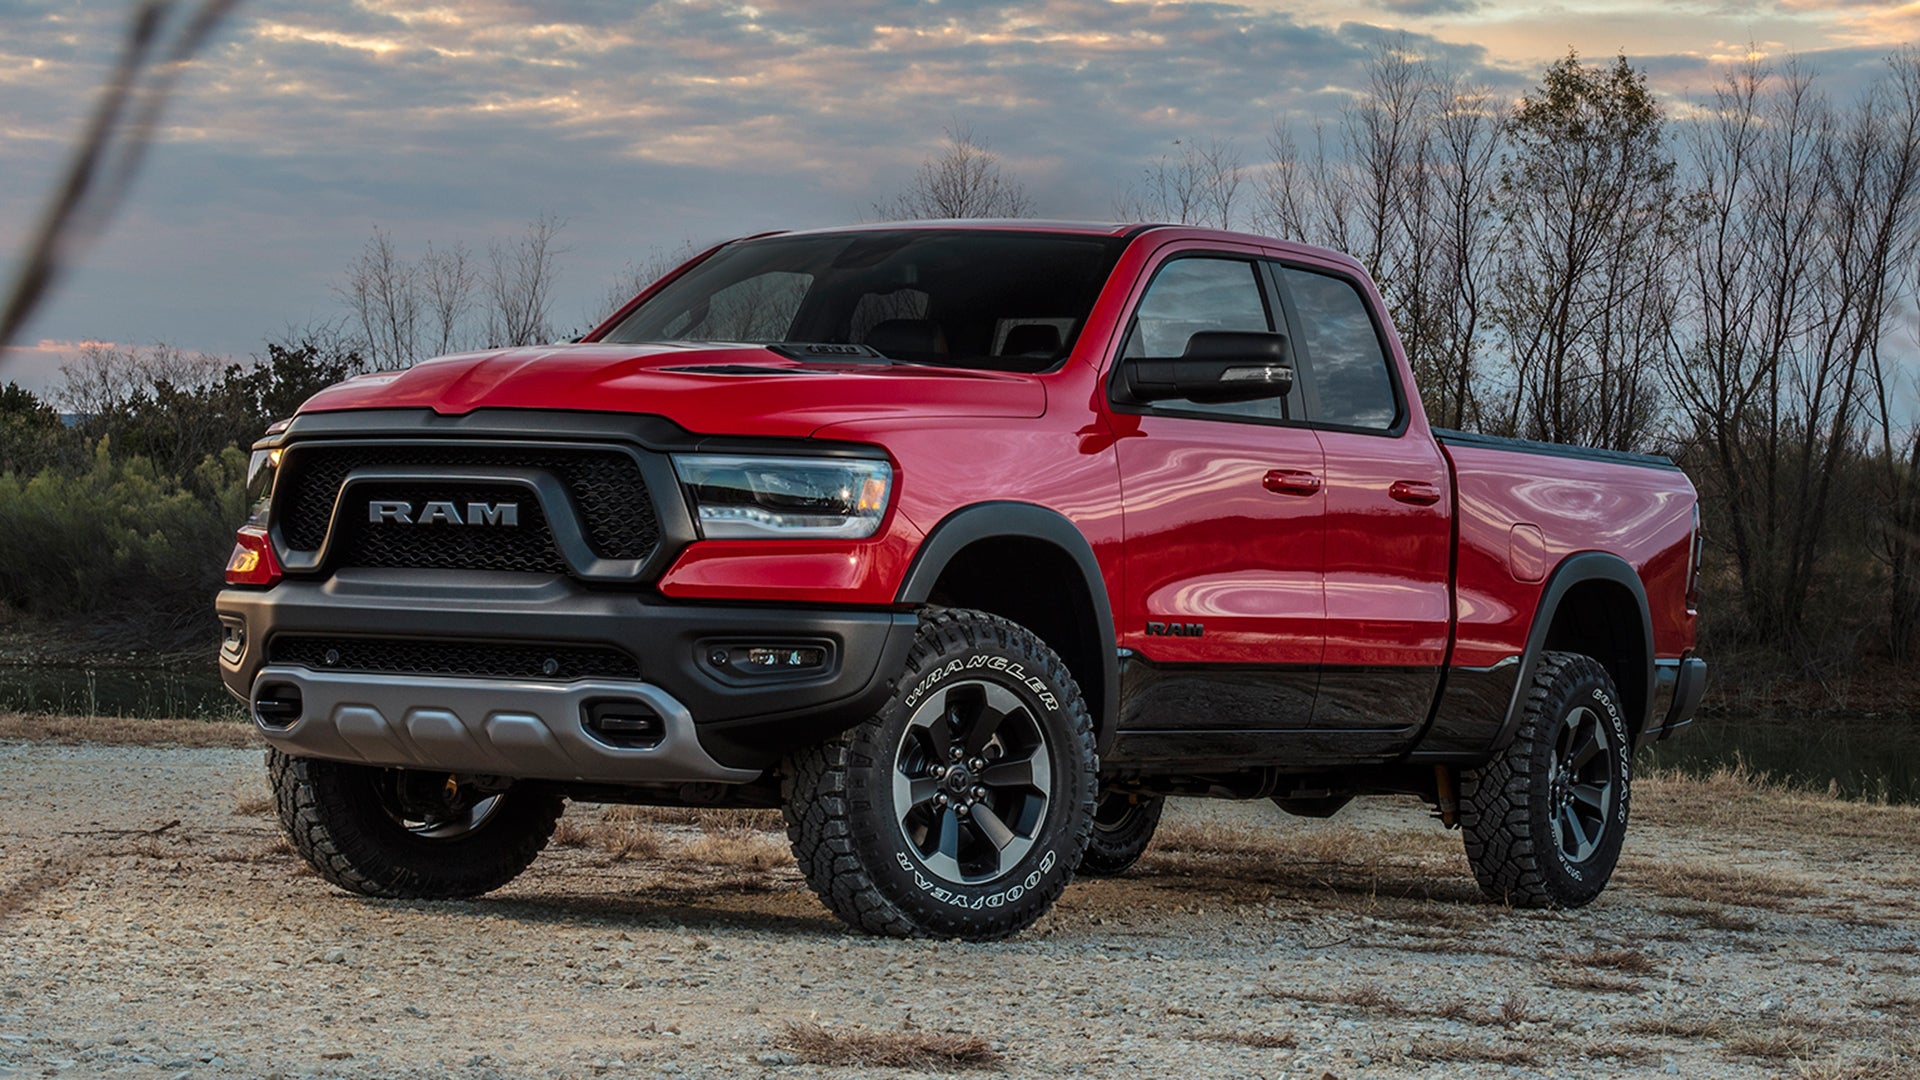 2019 Ram 1500 Rebel Quad Cab Review: A Solid Pickup Truck, Held Back Only By Expectations